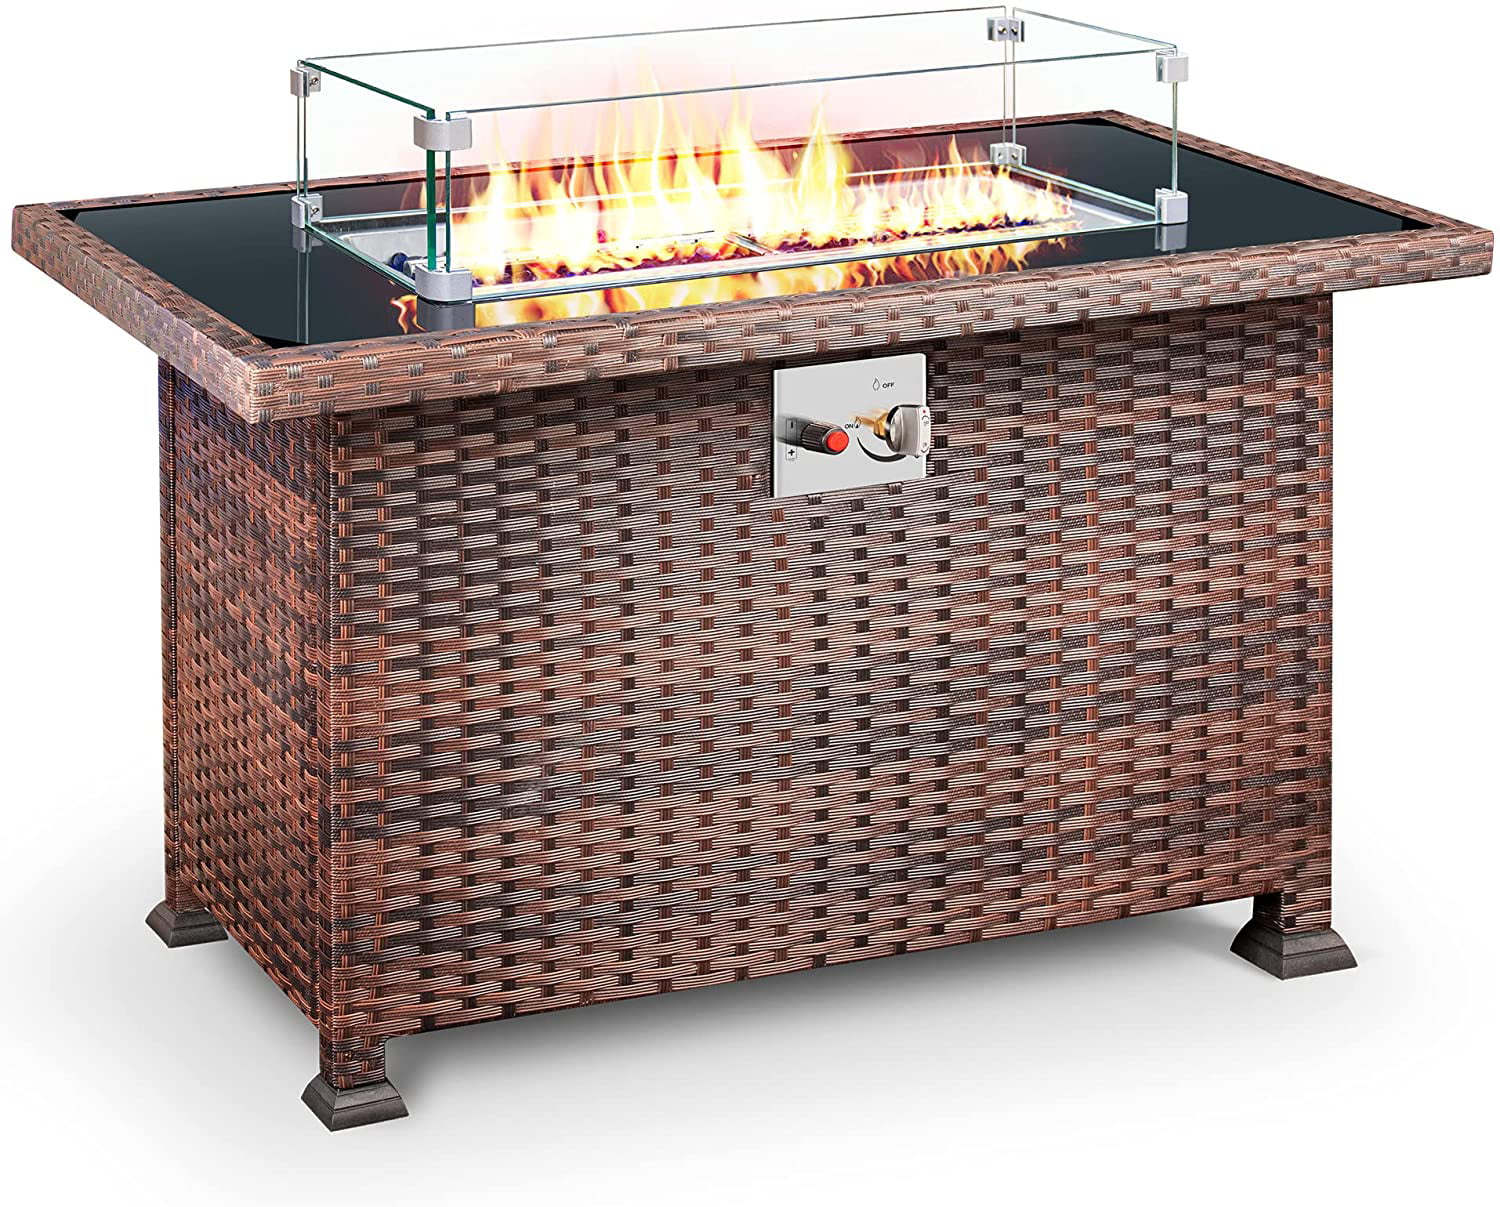 Glass Beads Auto-Ignition CSA Approved 36 Inch Outdoor Propane Large Fire Pit Table for Deck Outside Square Aluminum Gas Fire Pit Fireplace for Patio 60,000 BTU with Rattan Wicker Wind Guard Cover 